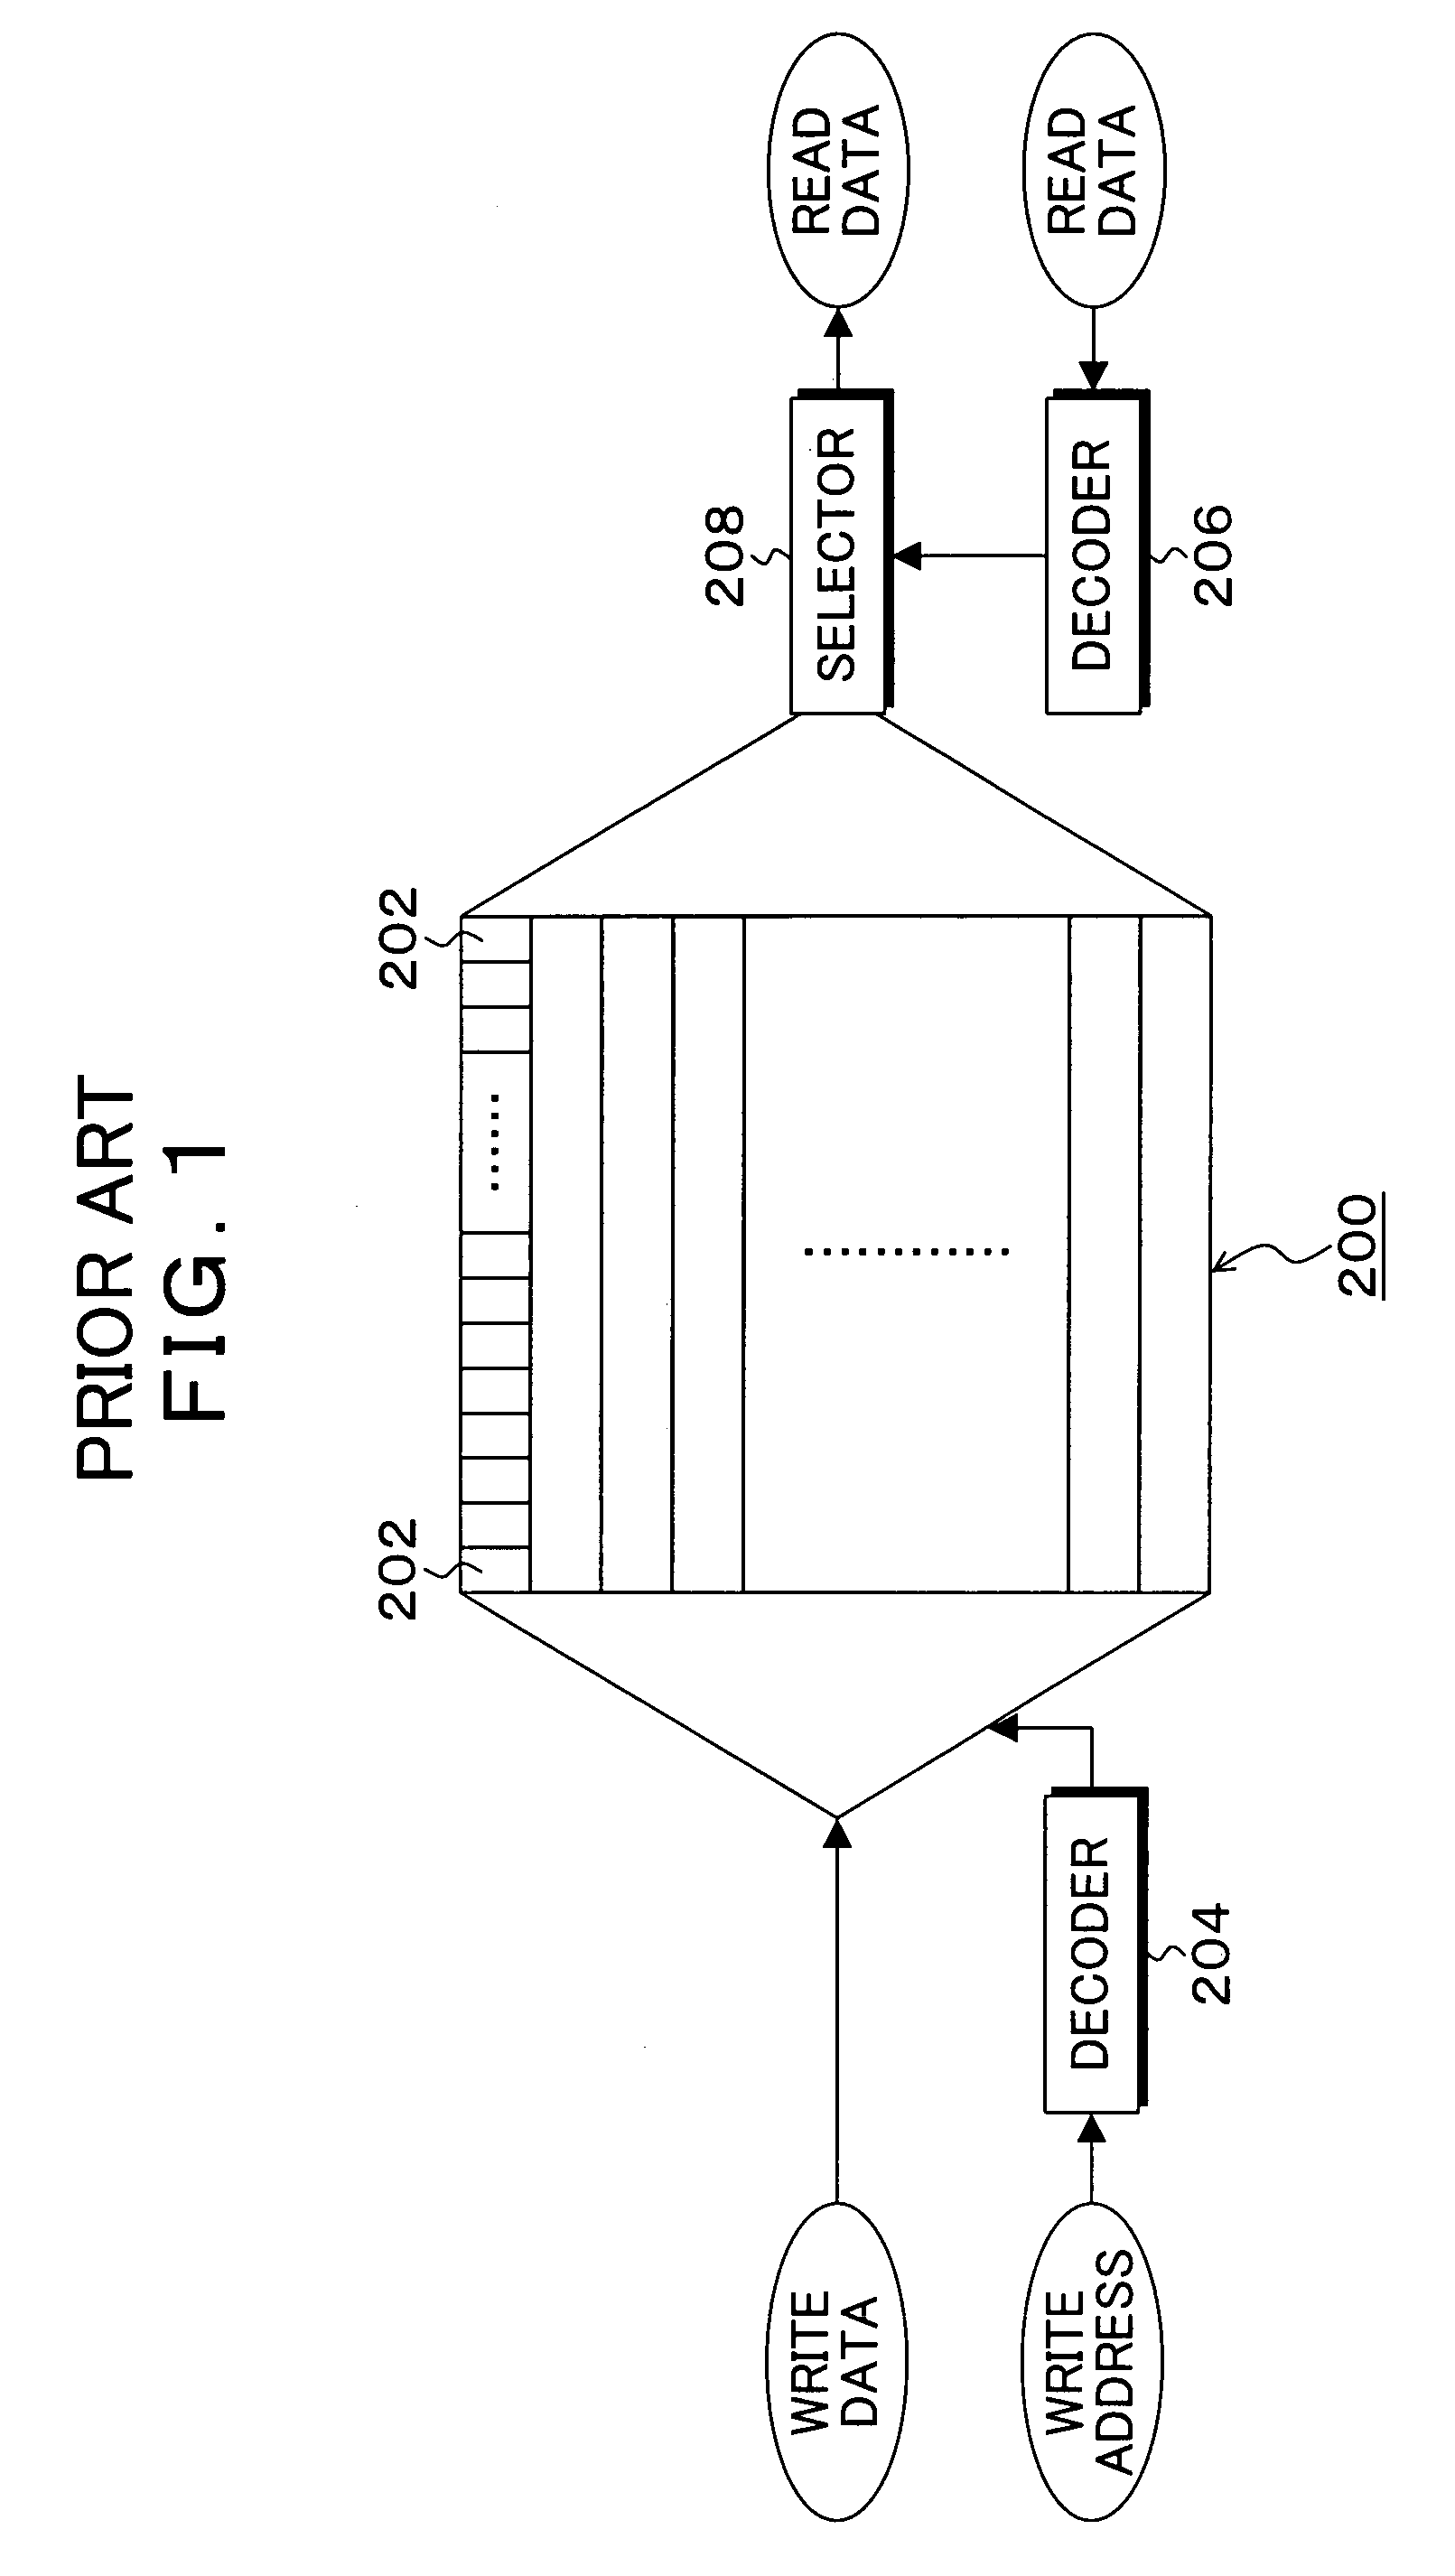 Register file and its storage device